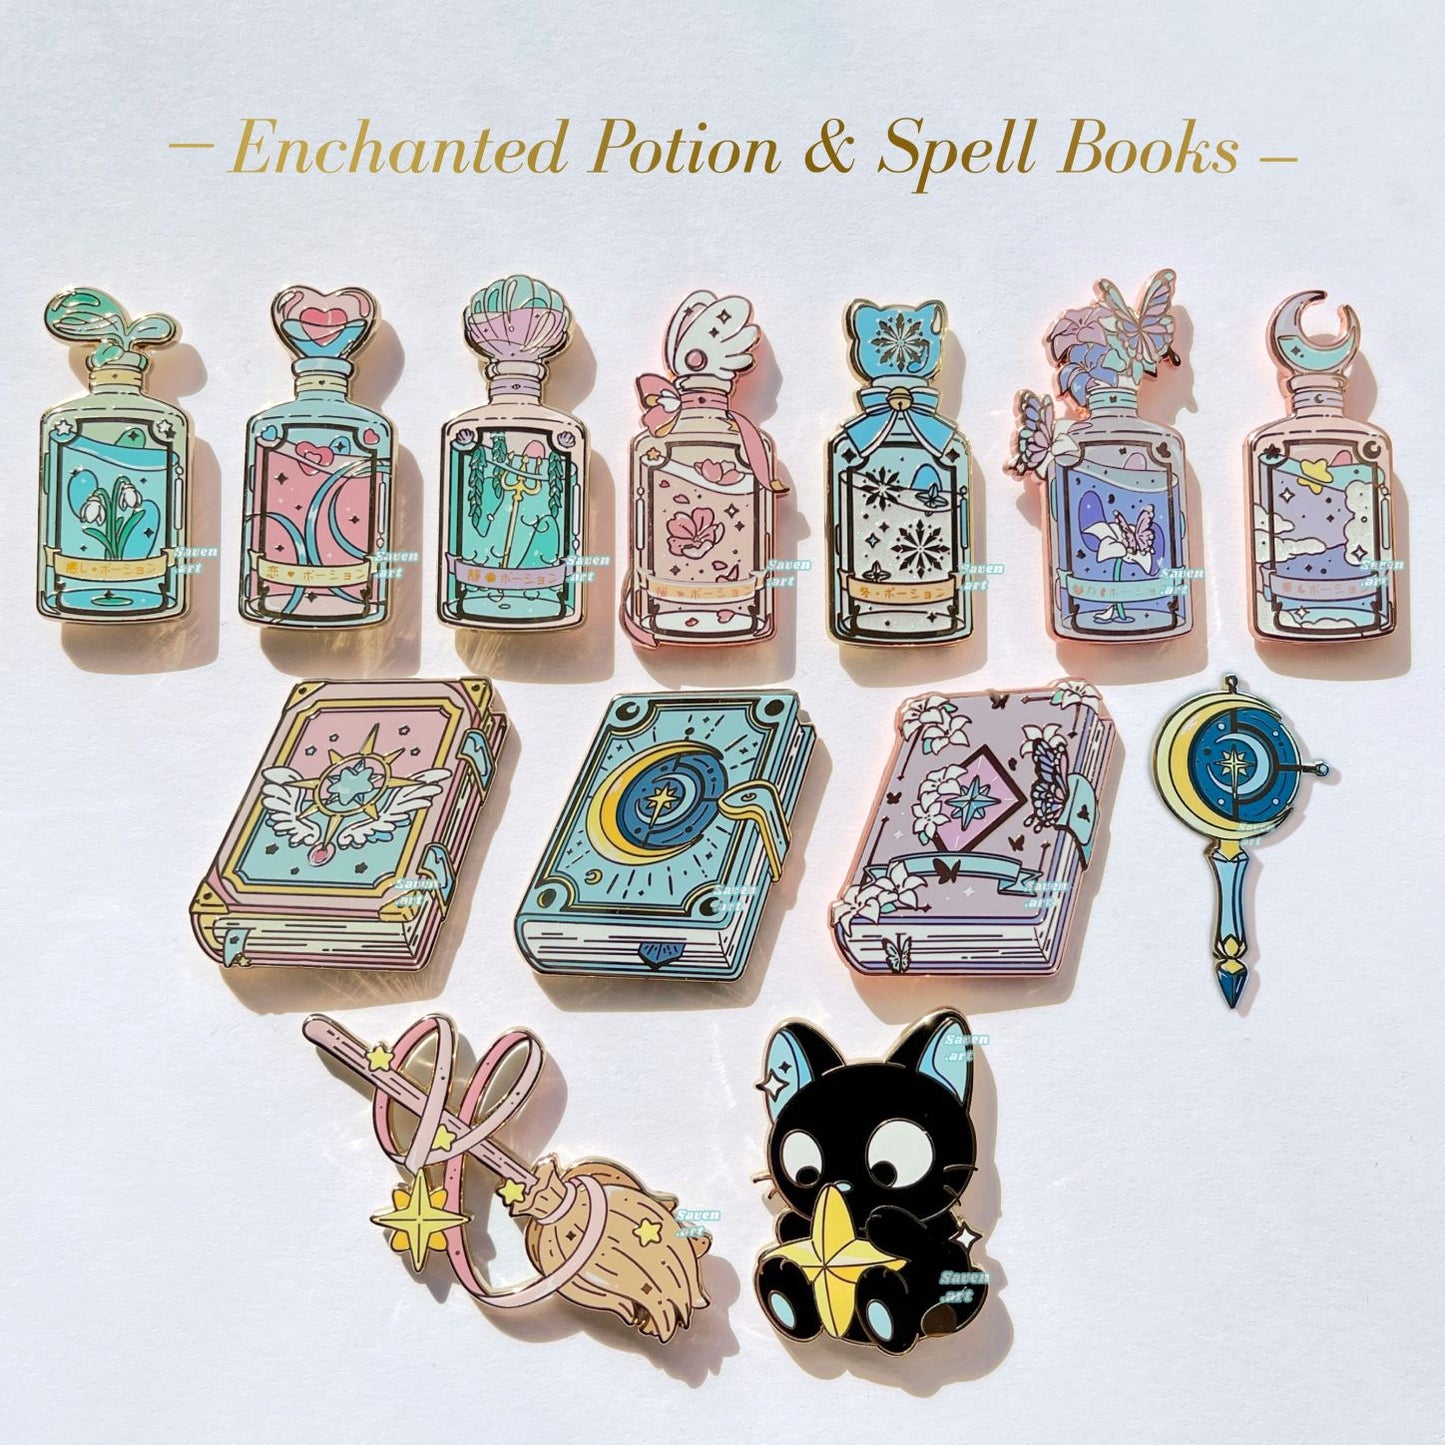 Enchanted Potions and Spell books Enamel Pin Bundles